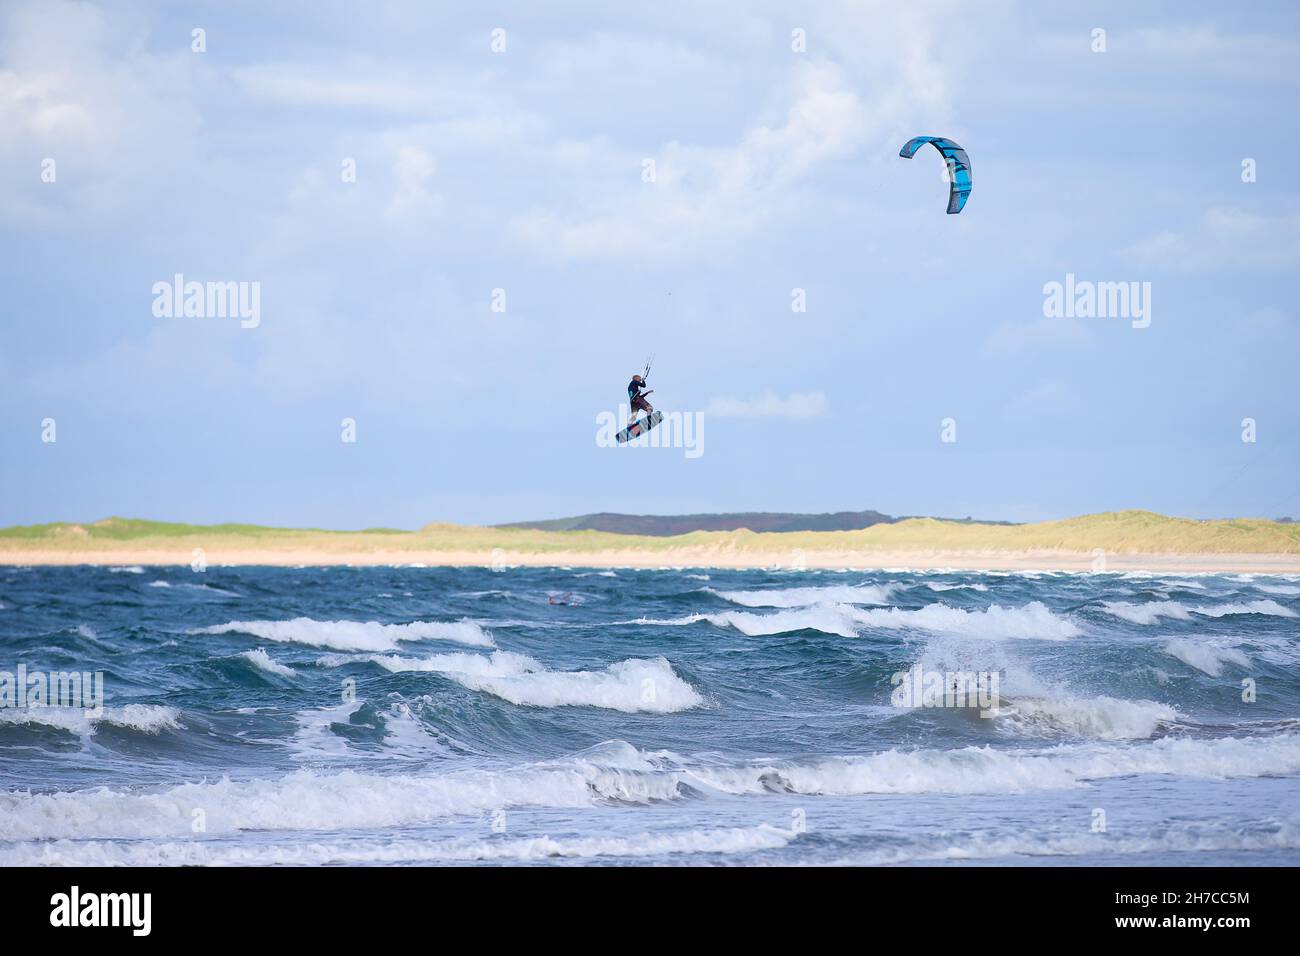 Kite surfers catching air off the Co. Sligo coast in the Atlantic Ocean off Ireland's west coast.  Just some of the fun on the Wild Atlantic Way. Stock Photo